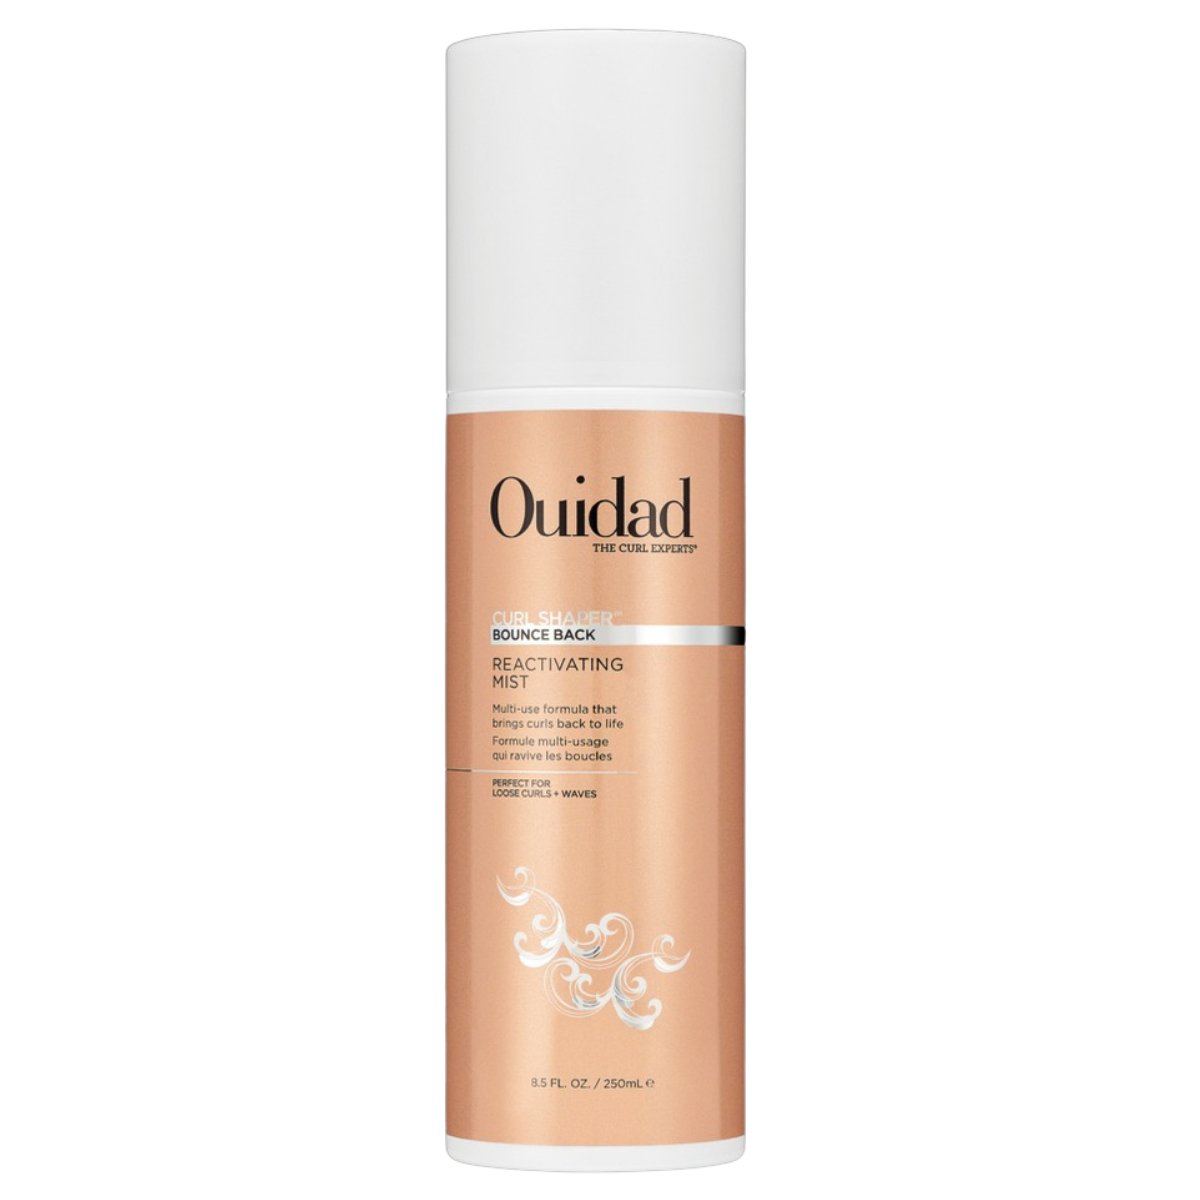 Ouidad Bounce Back Re-Activating Mist - SkincareEssentials